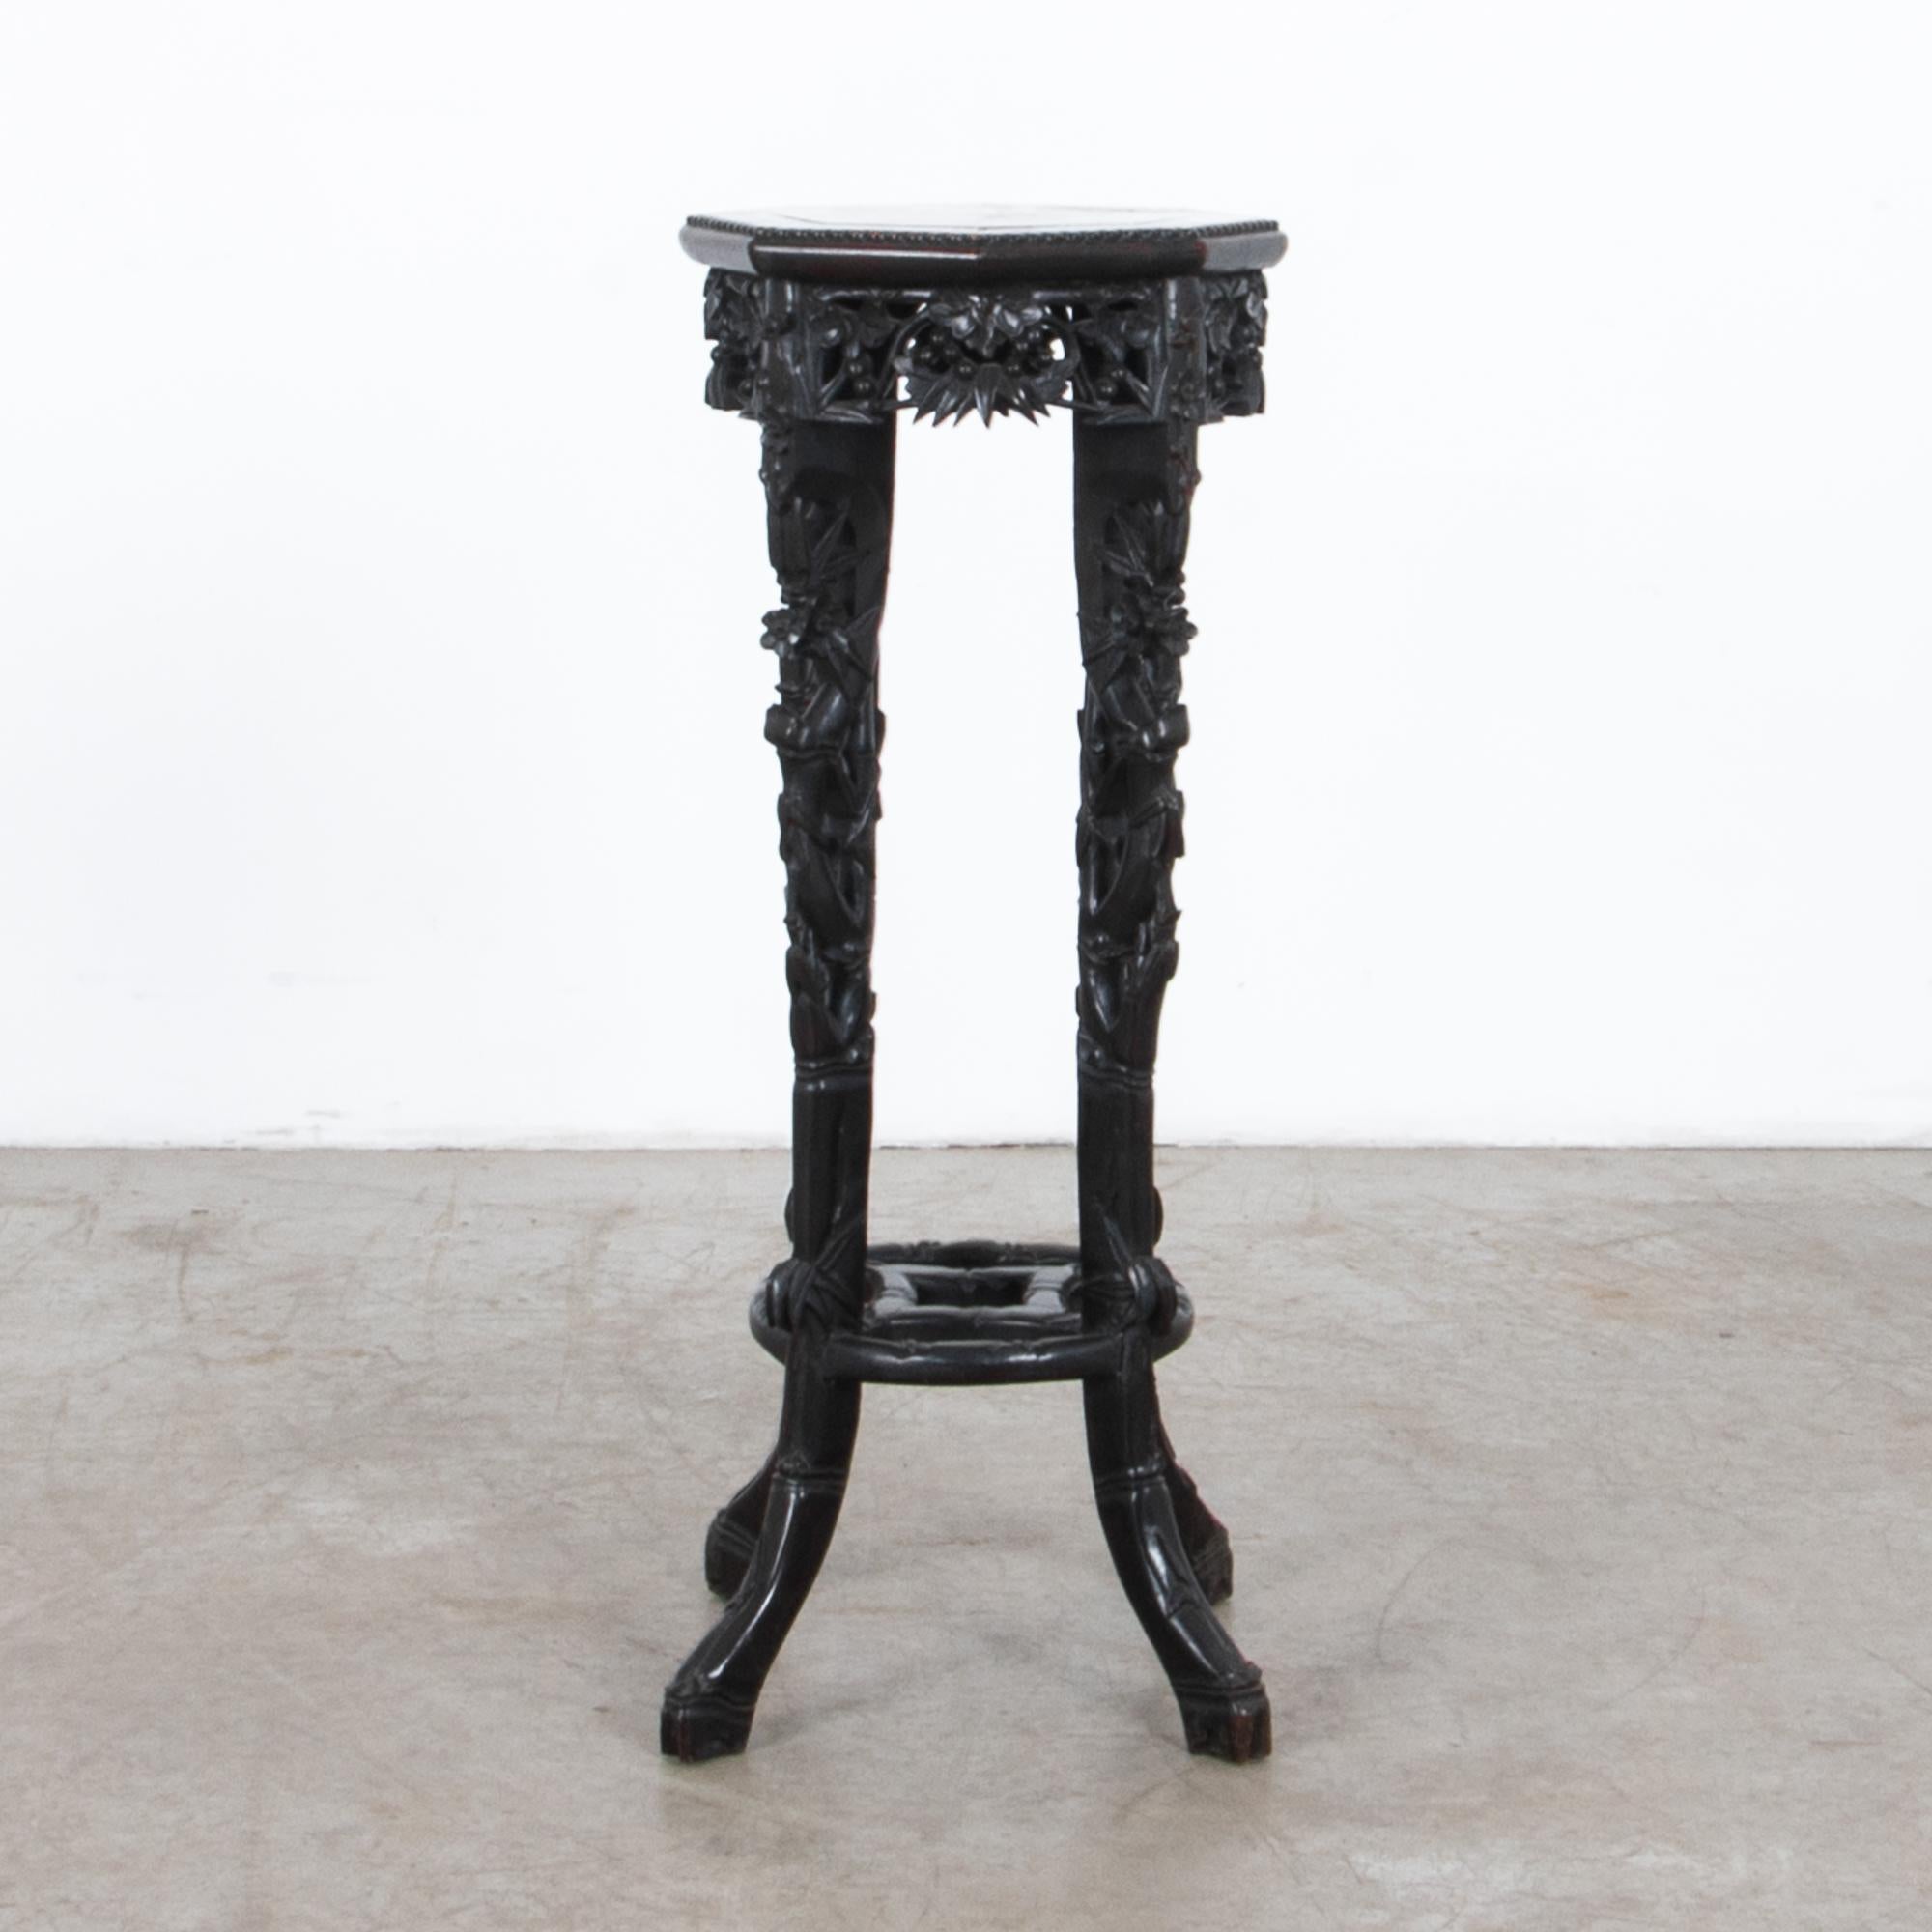 A carved rosewood table from France, circa 1900. Inspired by exotic locals, this table is carved with Asian inspired motifs and topped with Belgian red marble. A deep carved floral motif and zoomorphic feet present a fusion of styles, in a practical